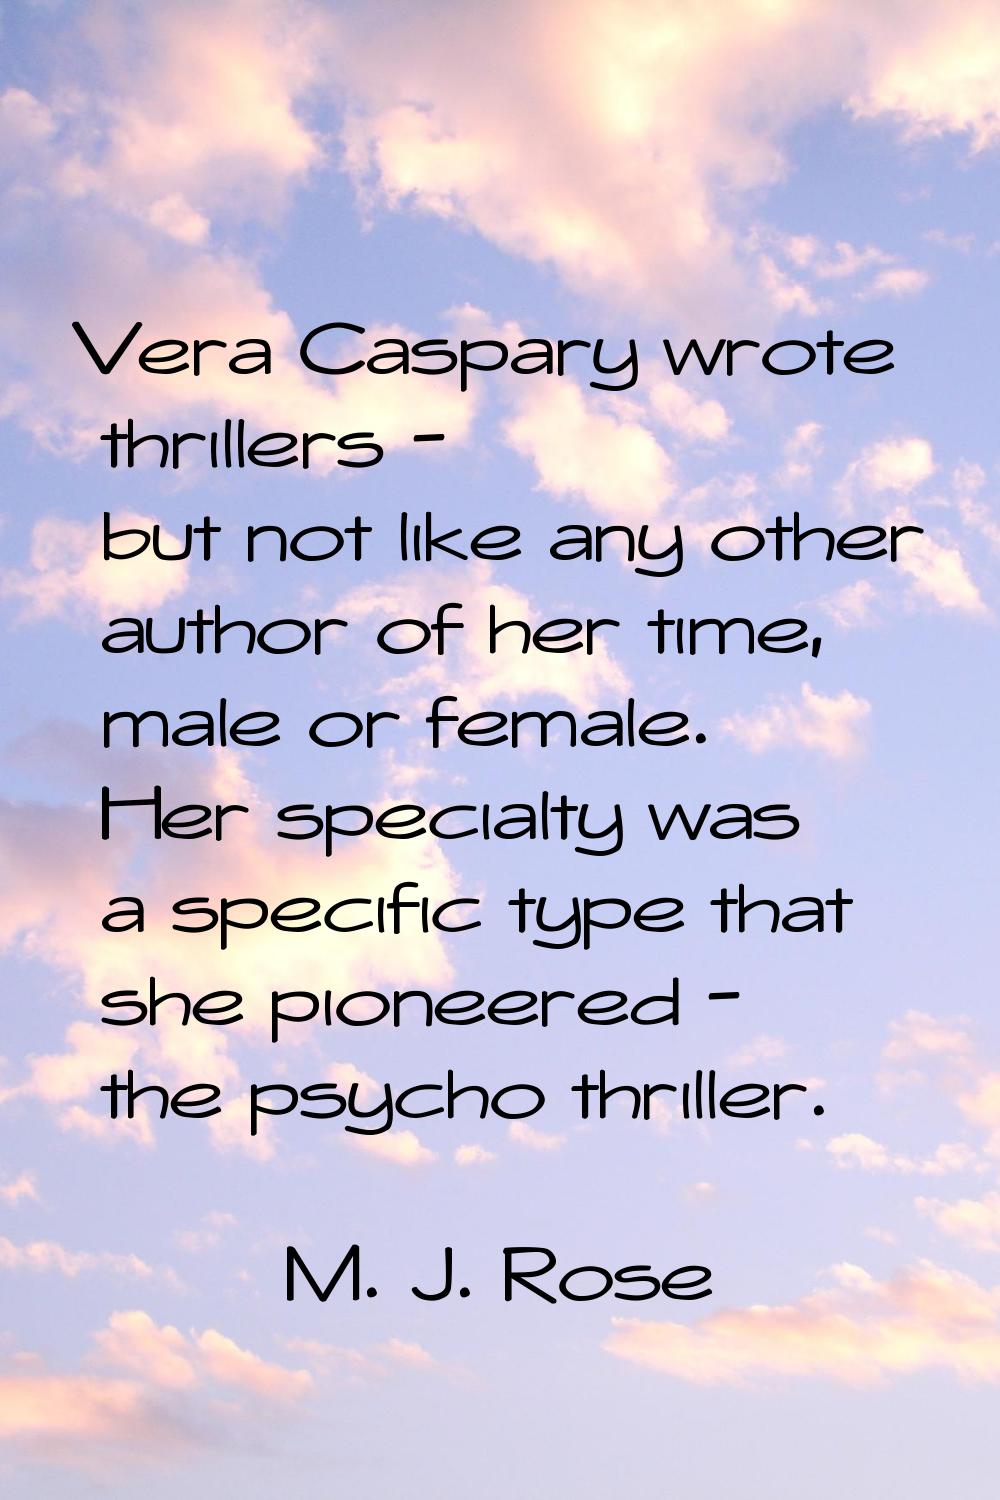 Vera Caspary wrote thrillers - but not like any other author of her time, male or female. Her speci